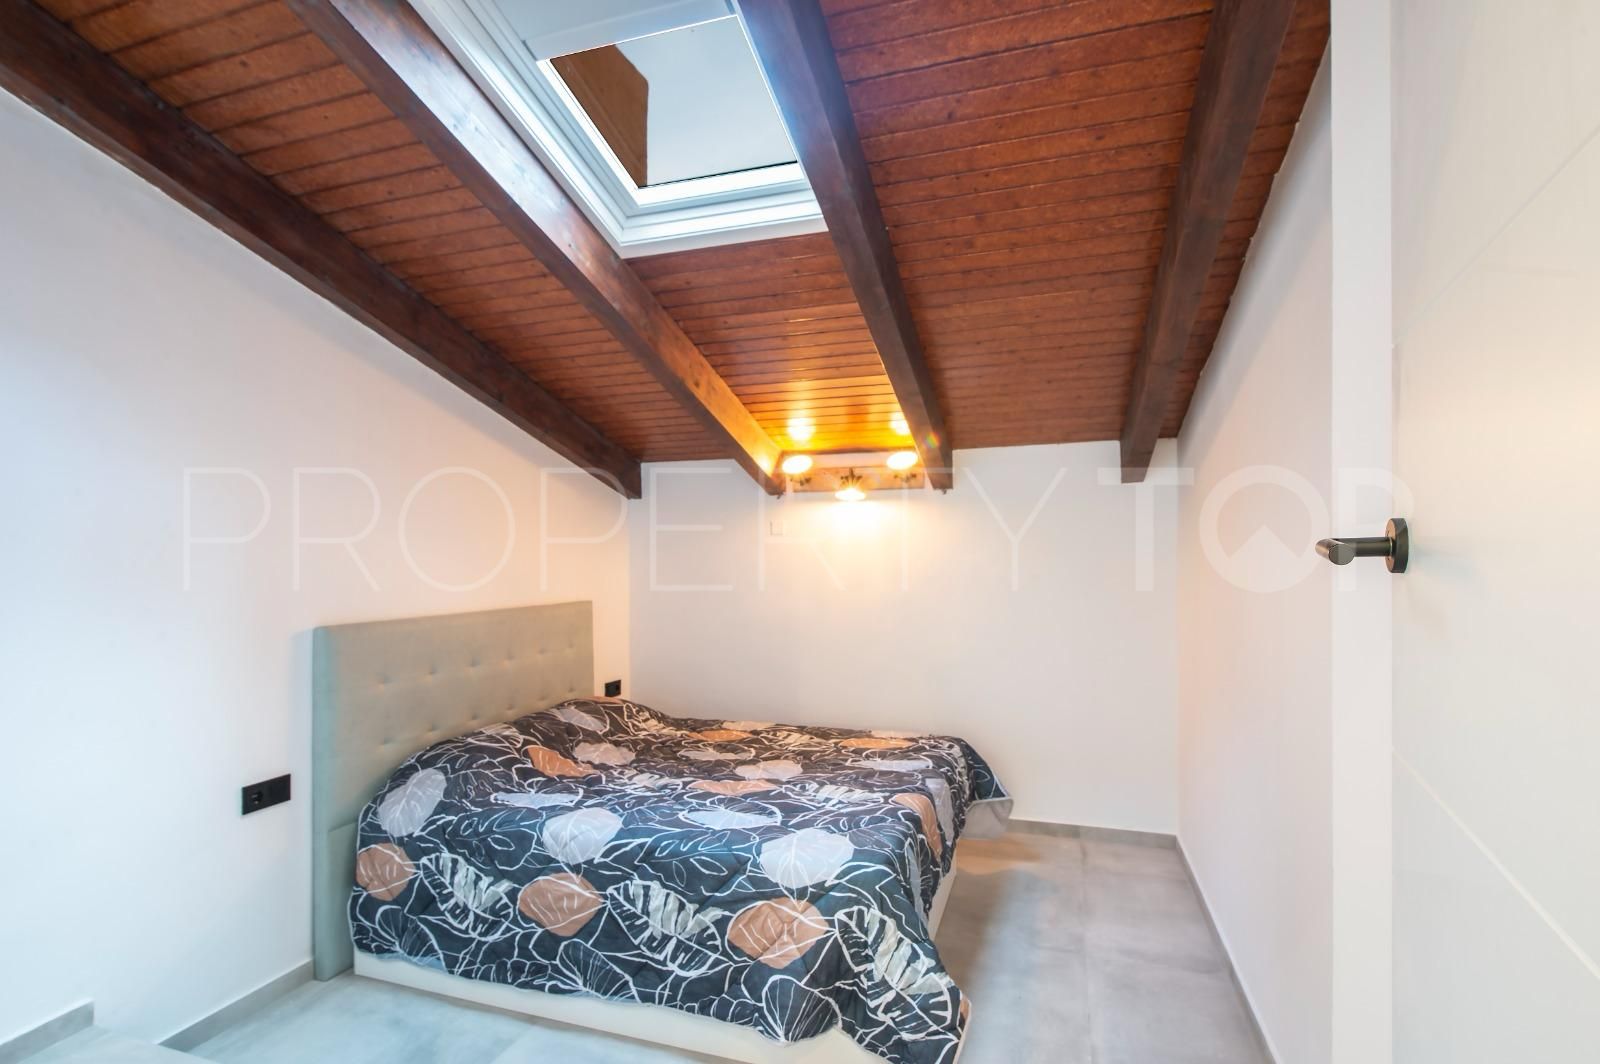 For sale Paraiso Barronal apartment with 5 bedrooms